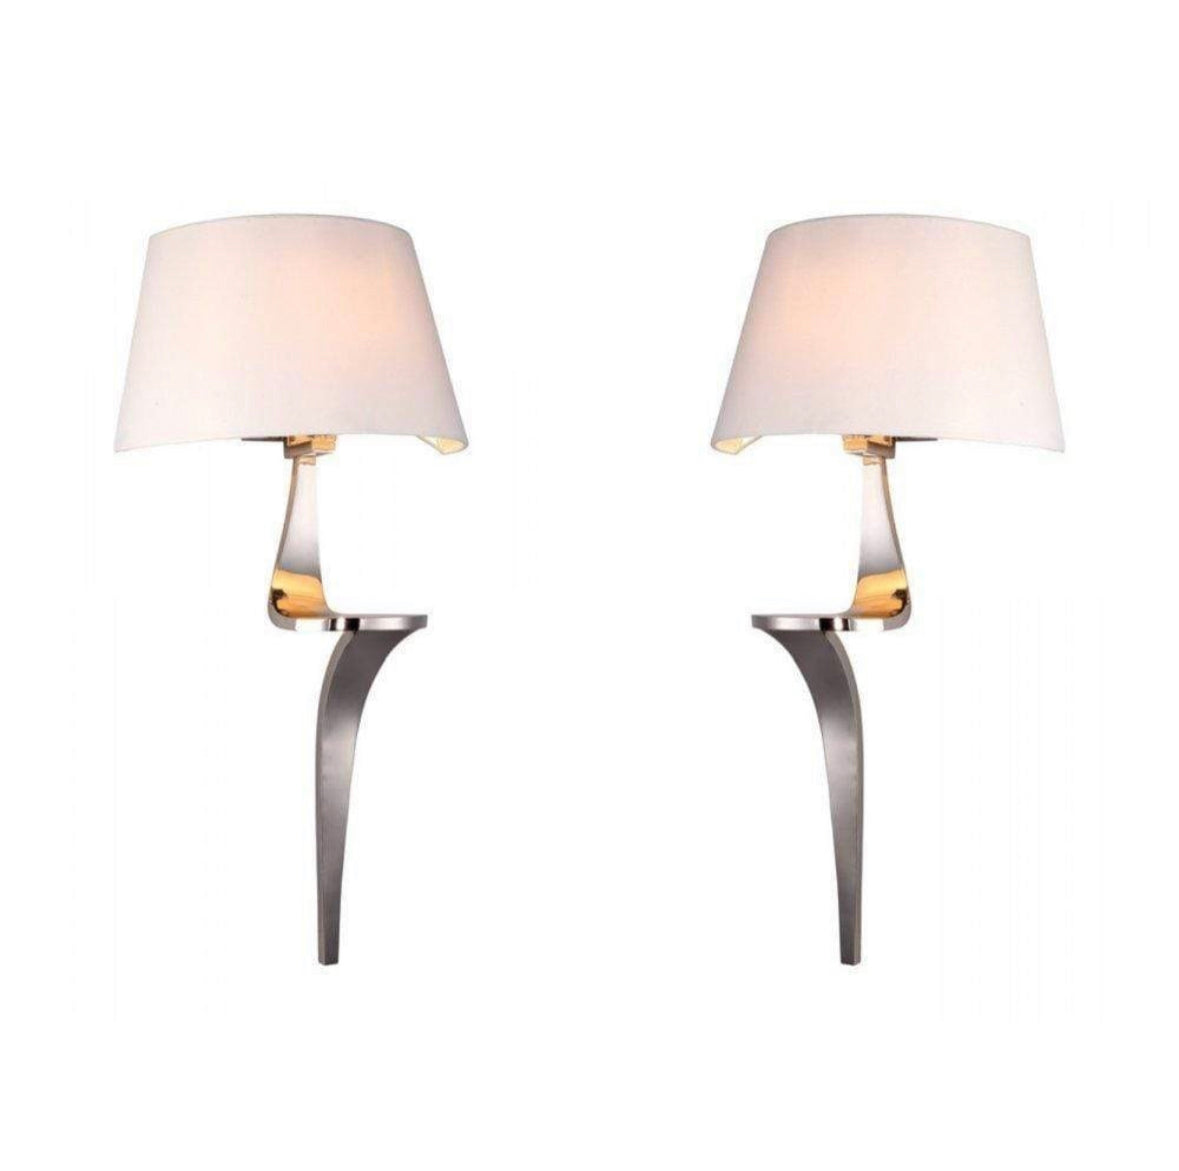 Enzo Pair of Nickel Finish Wall Lamps by RV Astley